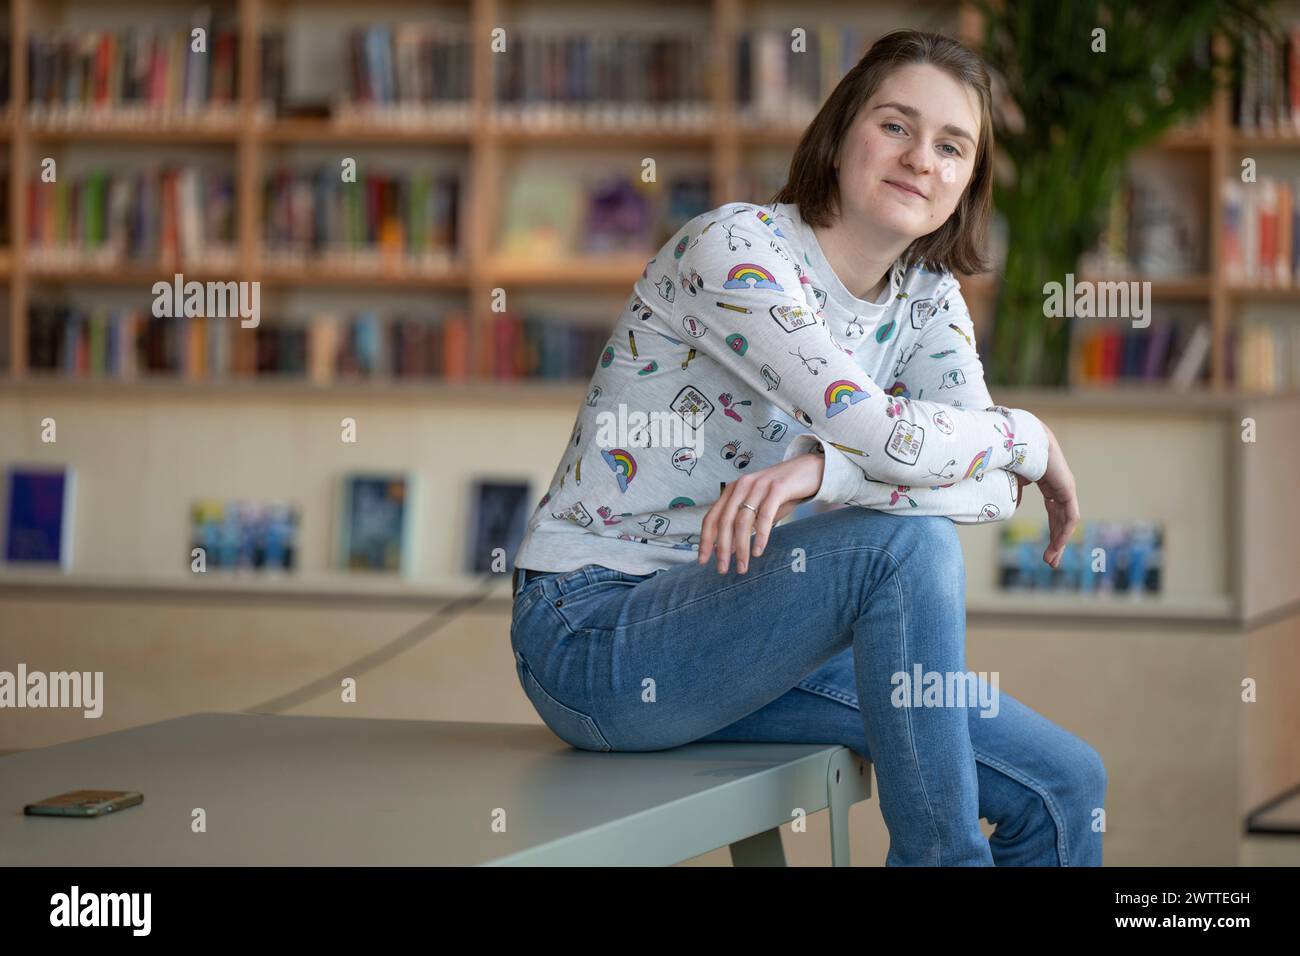 Casual moment captured of a young person lounging with a thoughtful expression. Stock Photo